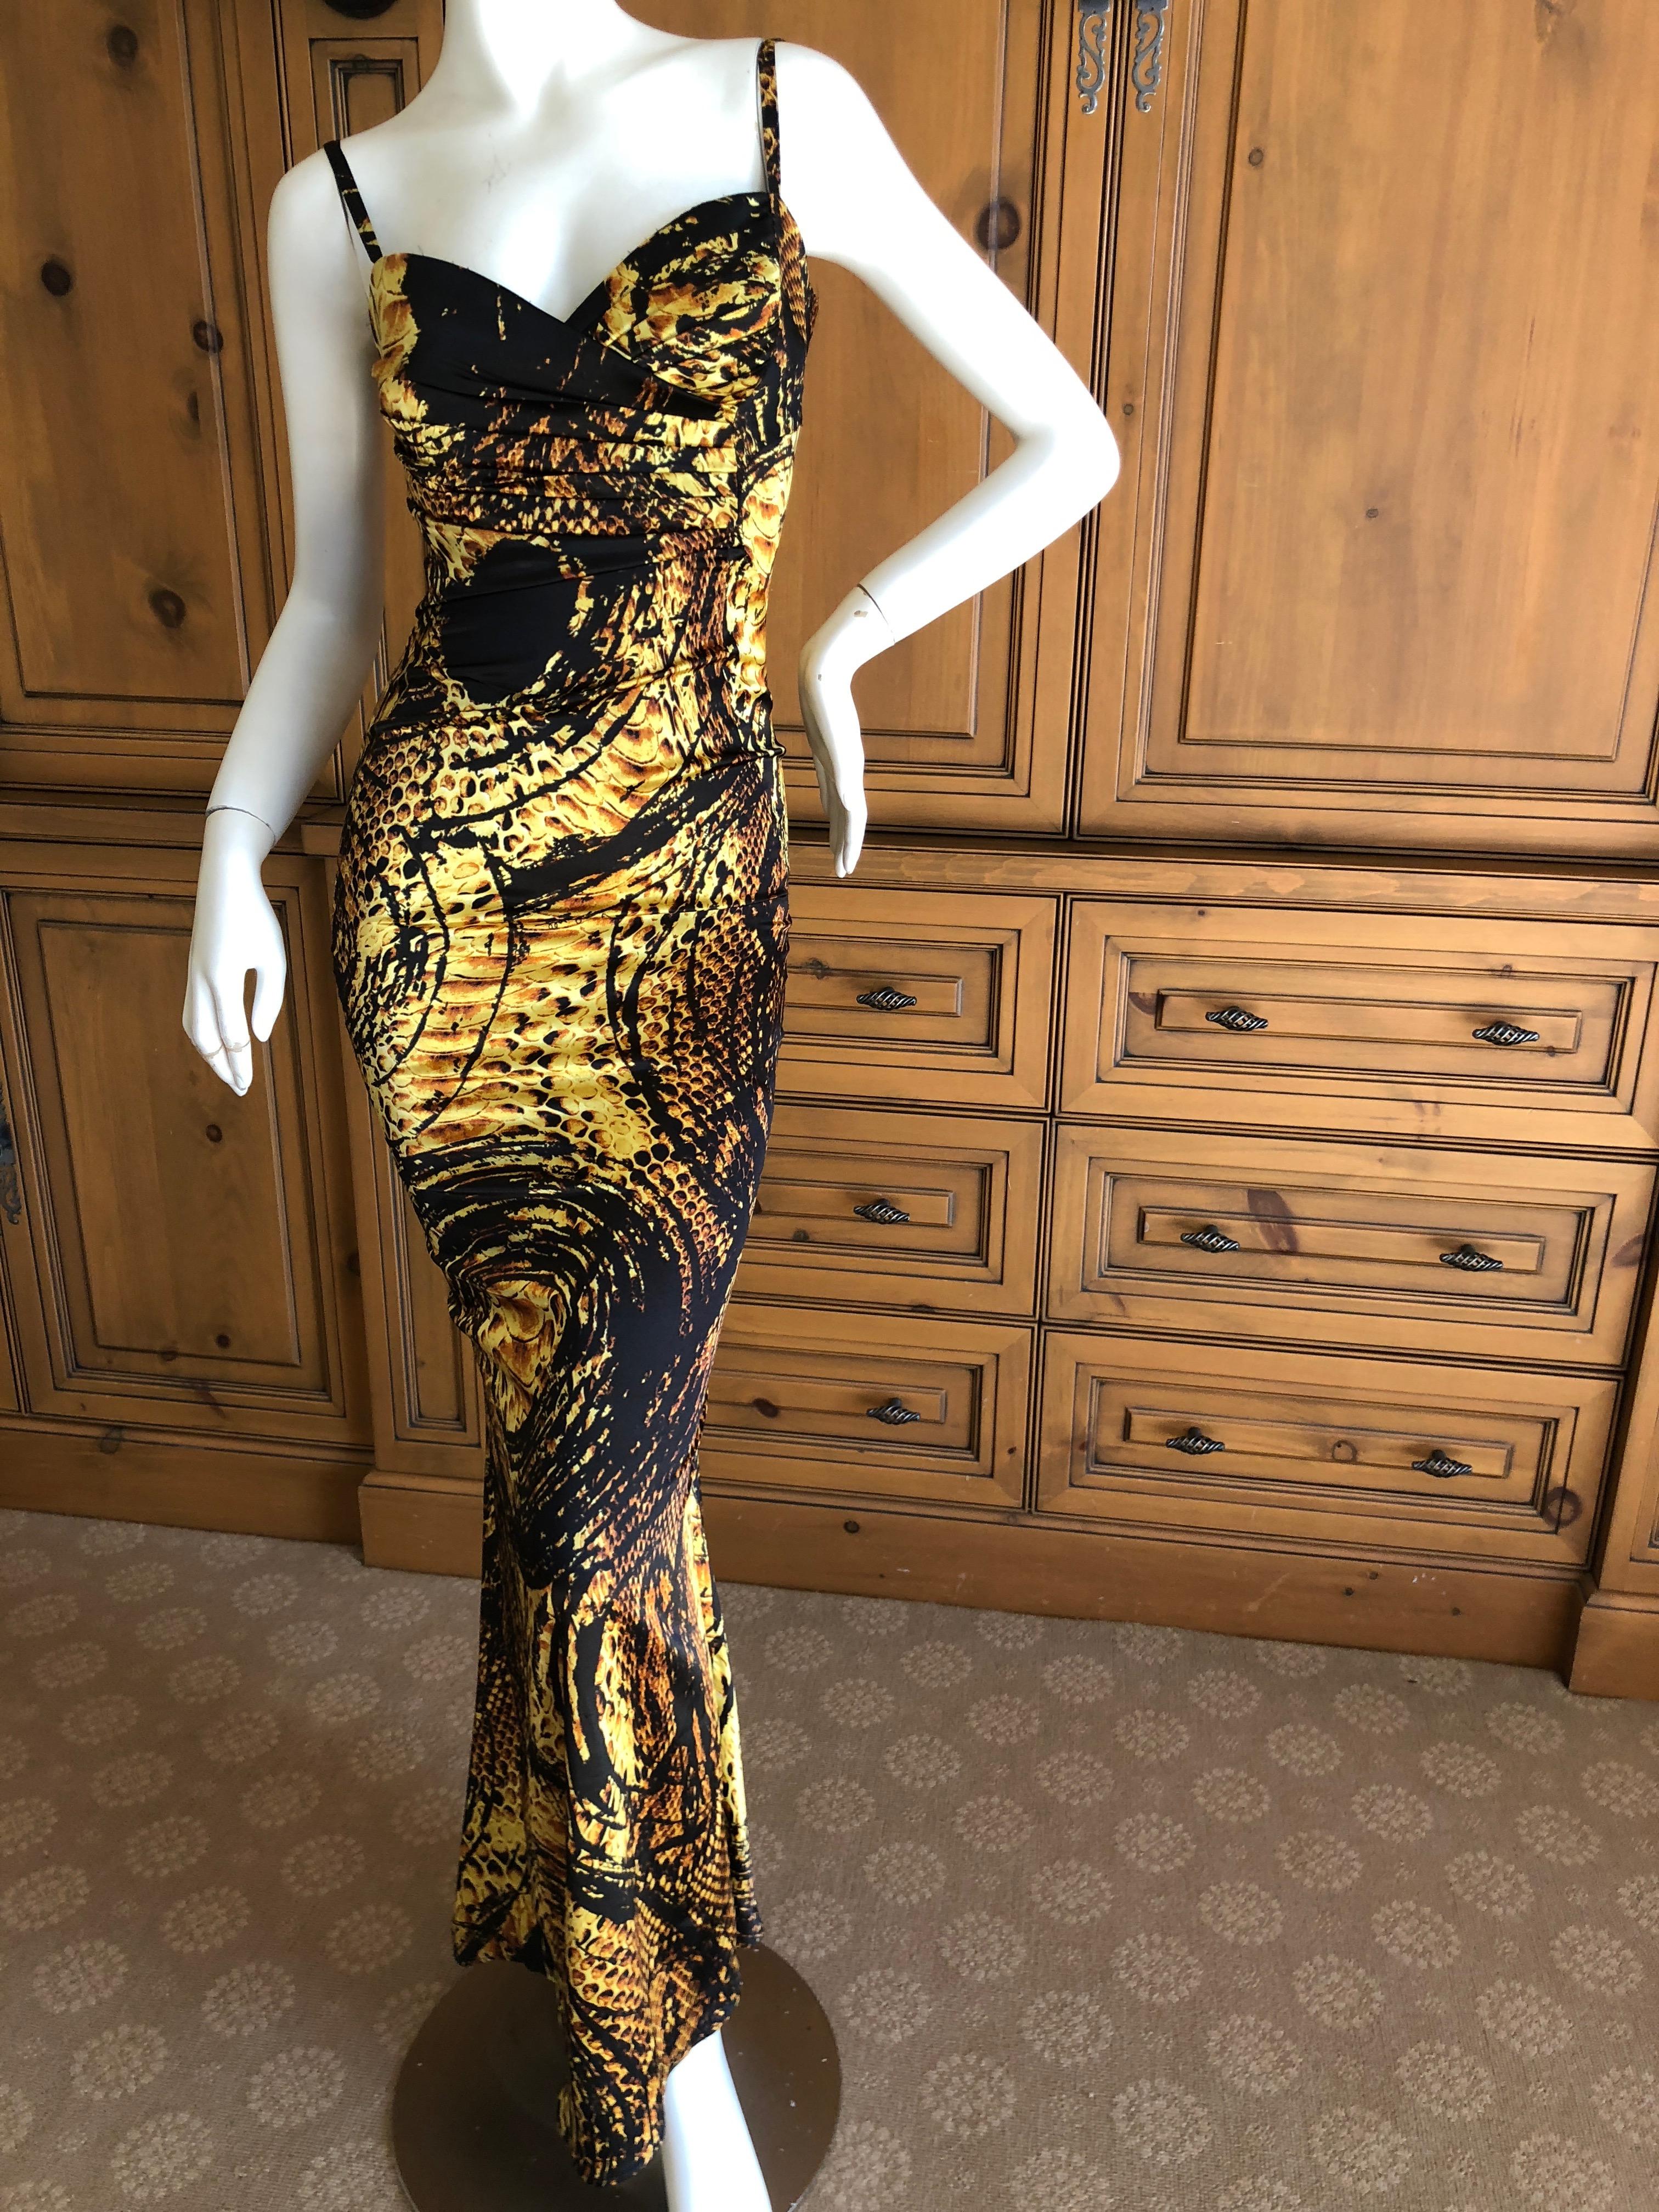 Roberto Cavalli Elegant Reptile printEvening Dress.
This is so pretty, with a rich gold on black print
Size 38, but runs small.
Bust 36